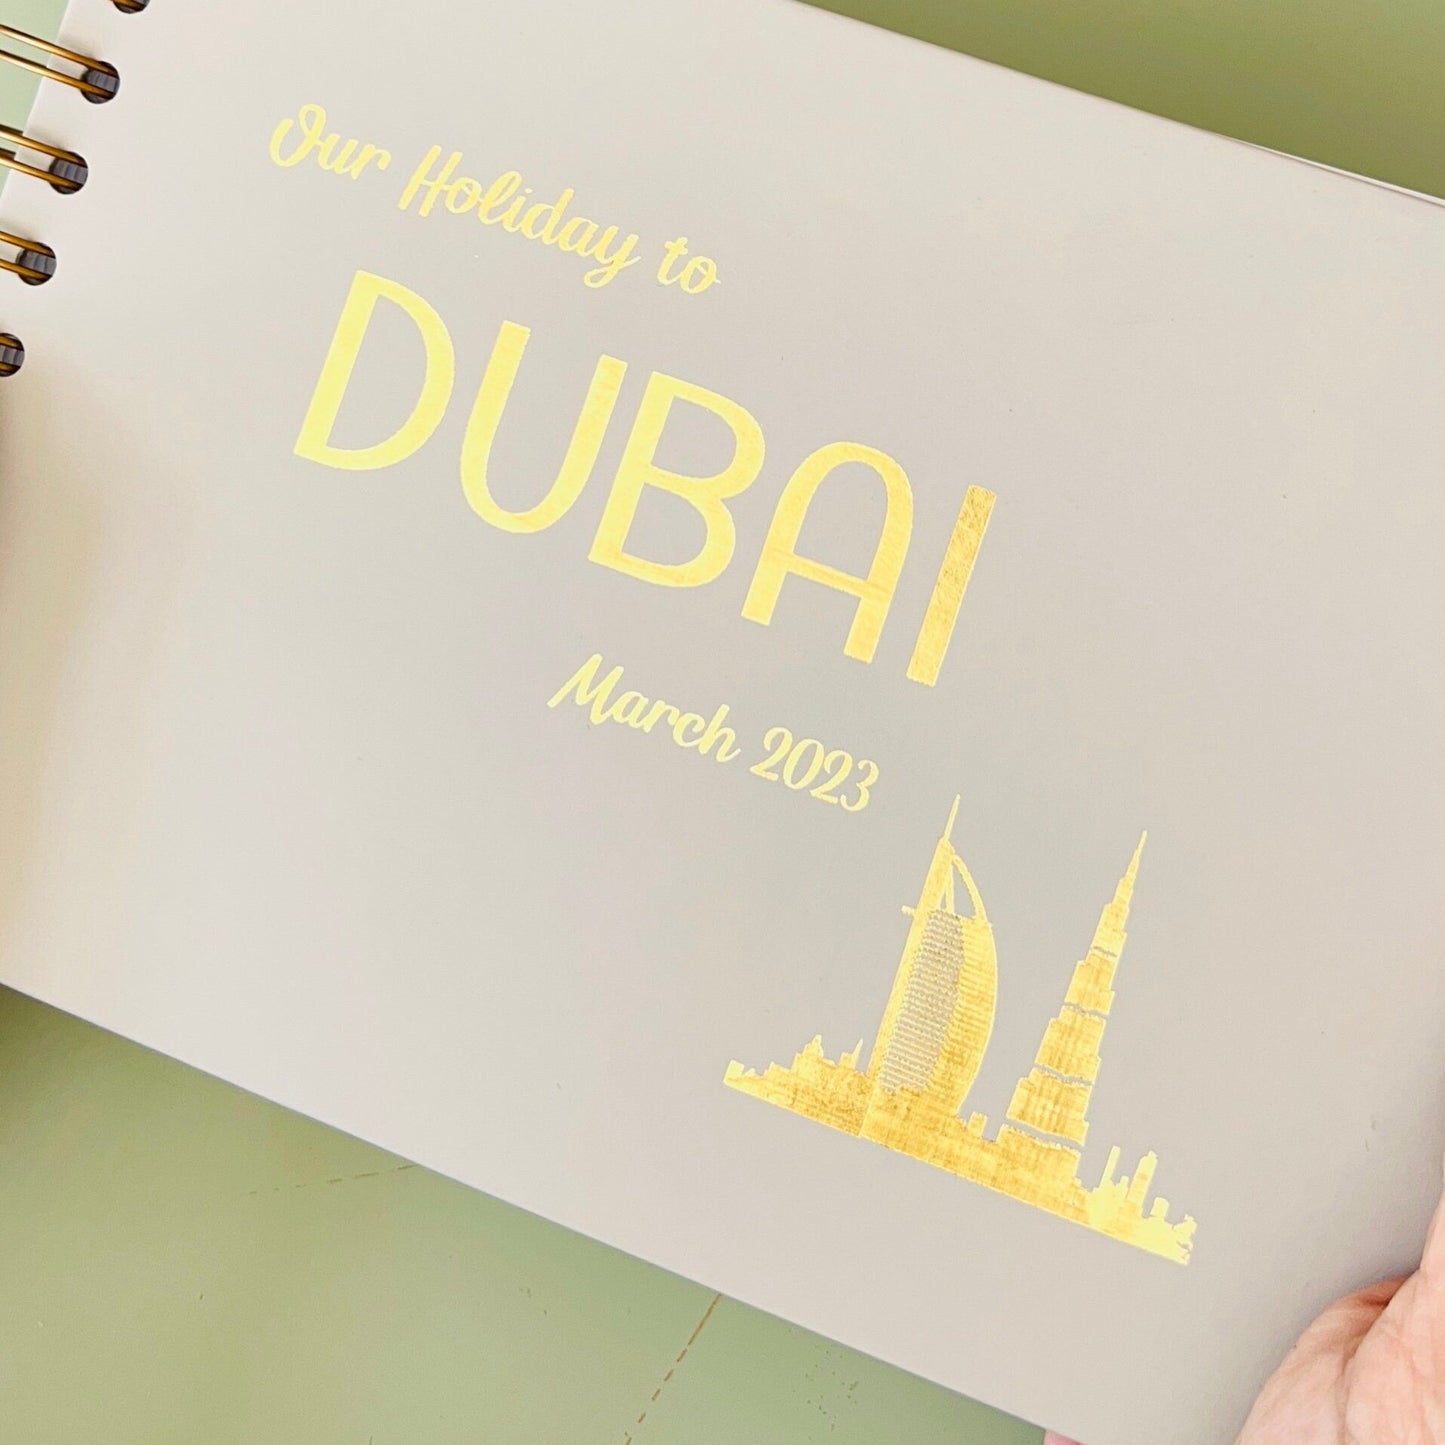 A5 hardback book in a stone colour that says Our Holiday to Dubai in gold foil and there are pictures of a holiday surrounding the book